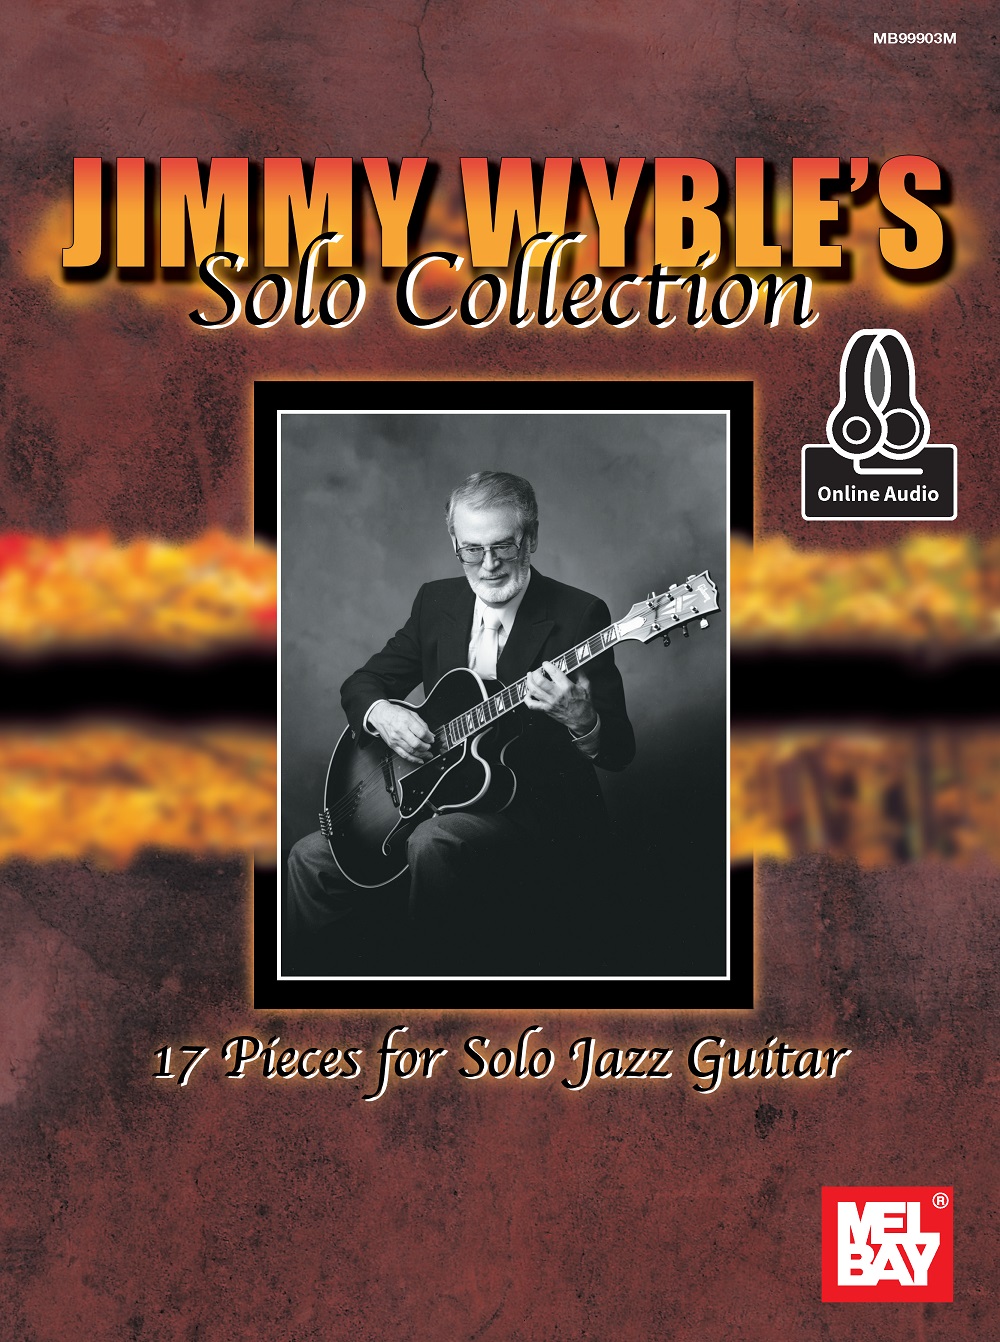 Solo collection. Jimmy Wyble's books. Jimmy Wyble's Classical/Country.